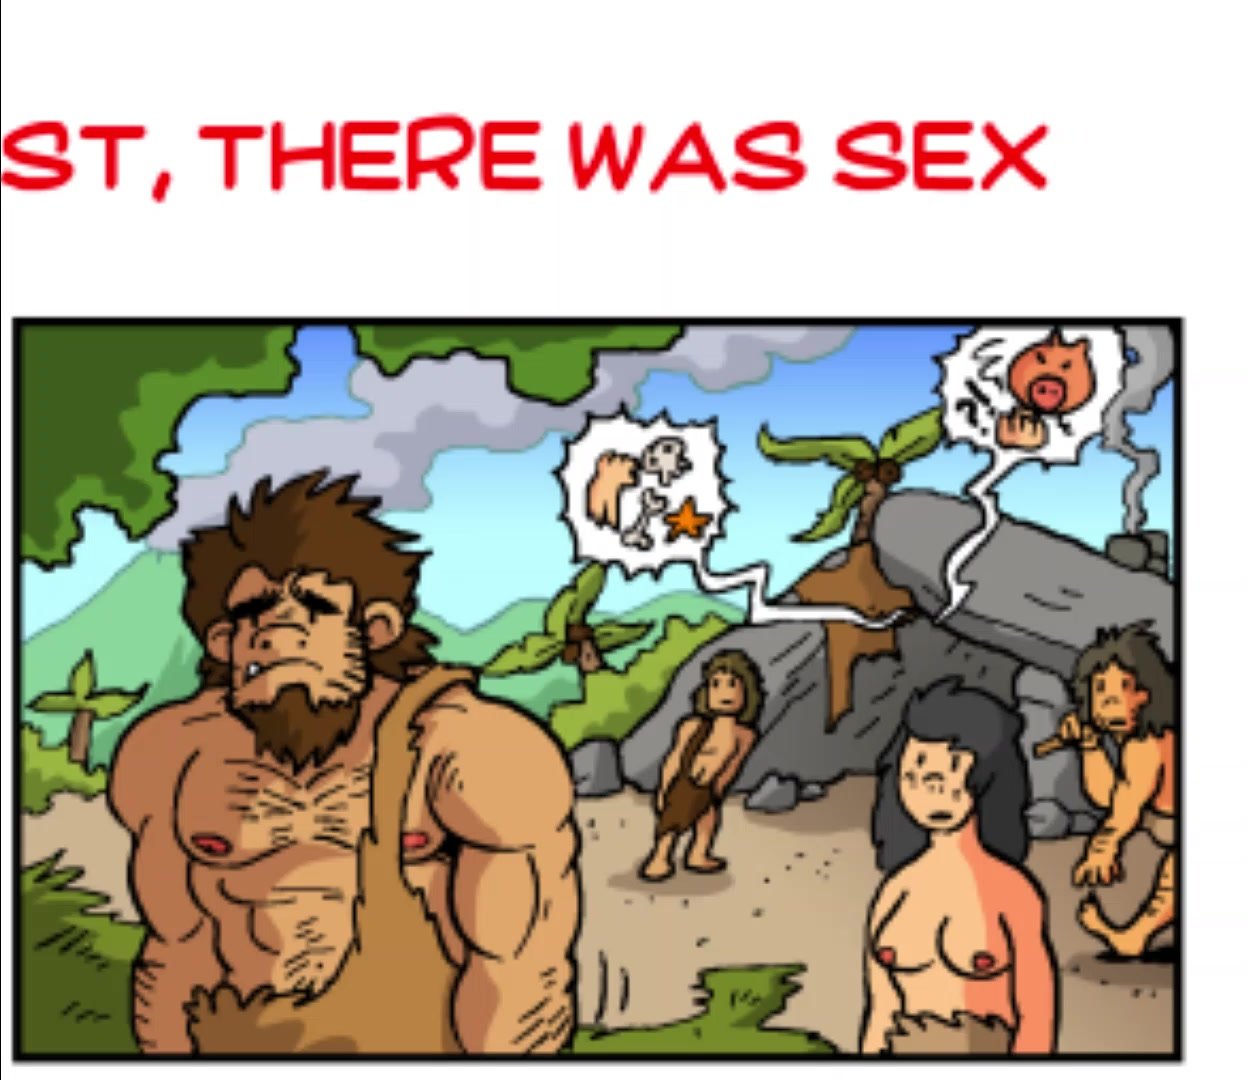 First there was SEX